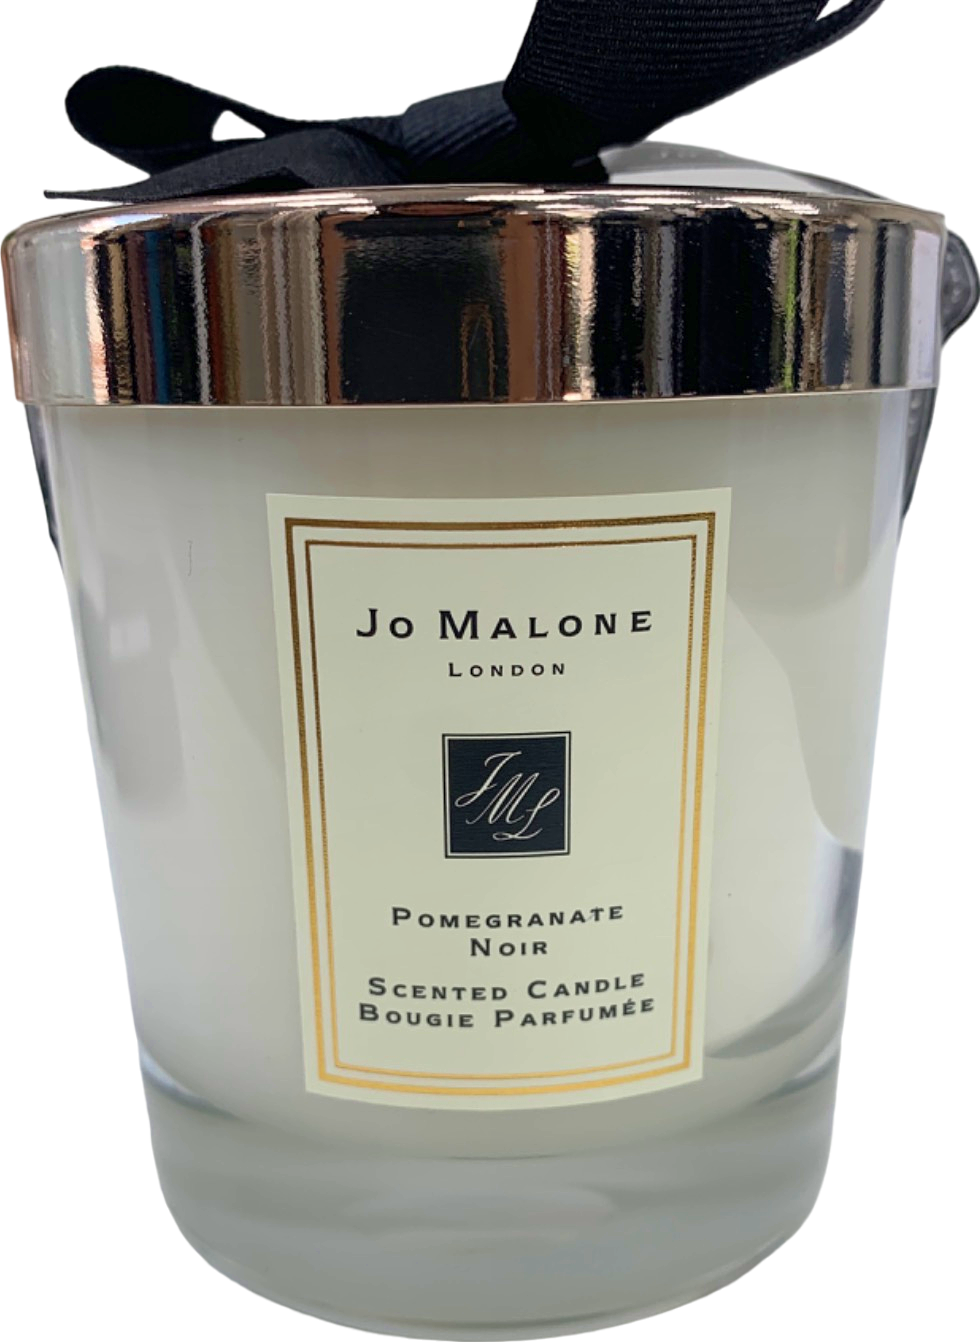 Jo Malone Pomegranate Noir Scented Candle 200g